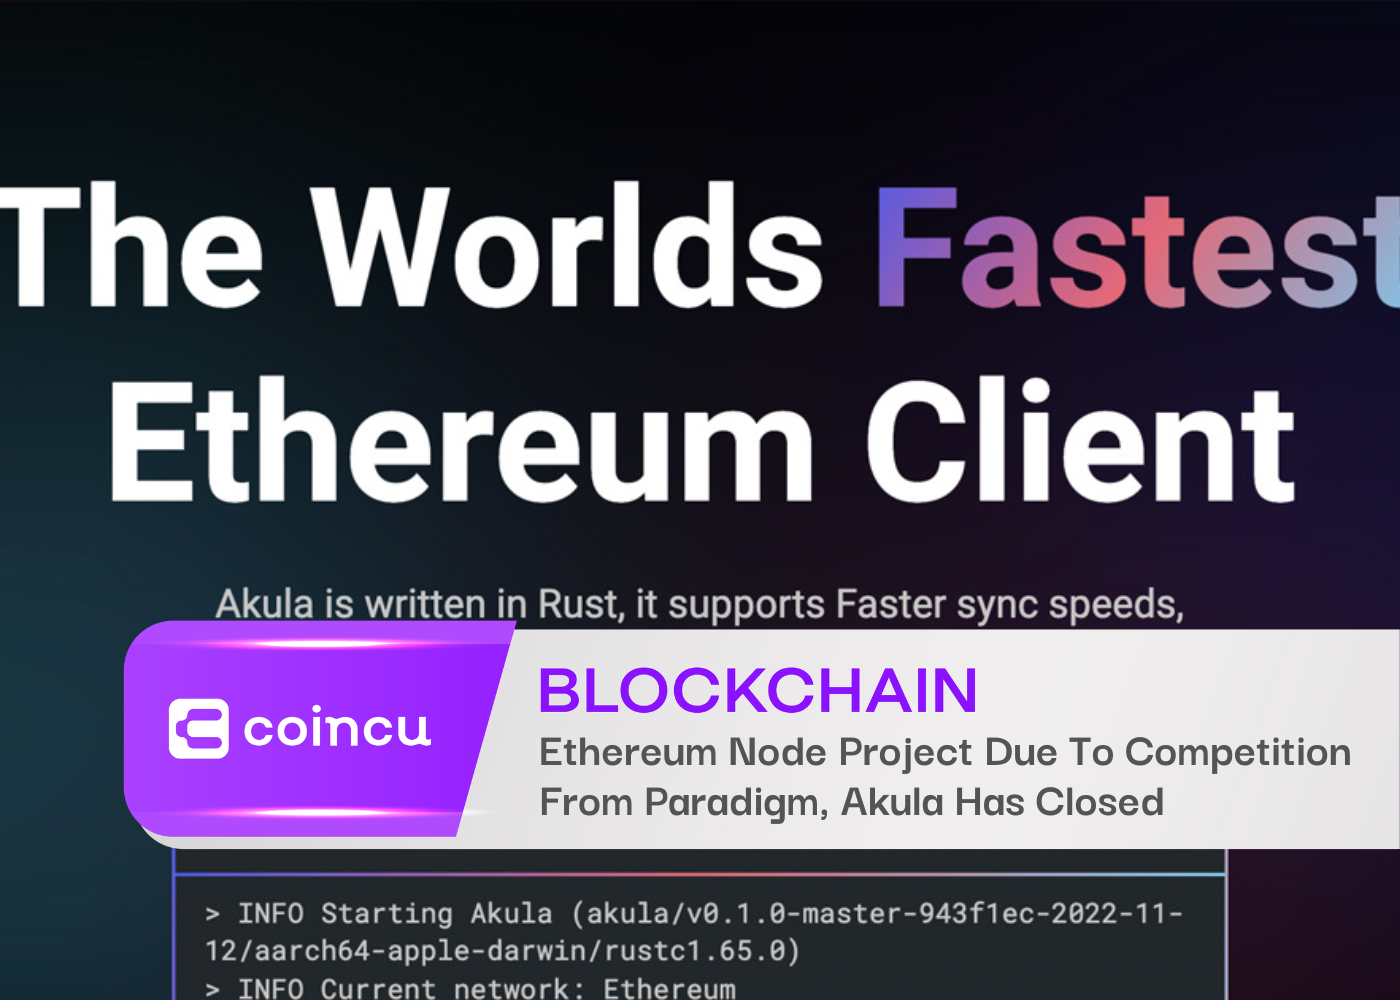 Ethereum Node Project Due To Competition